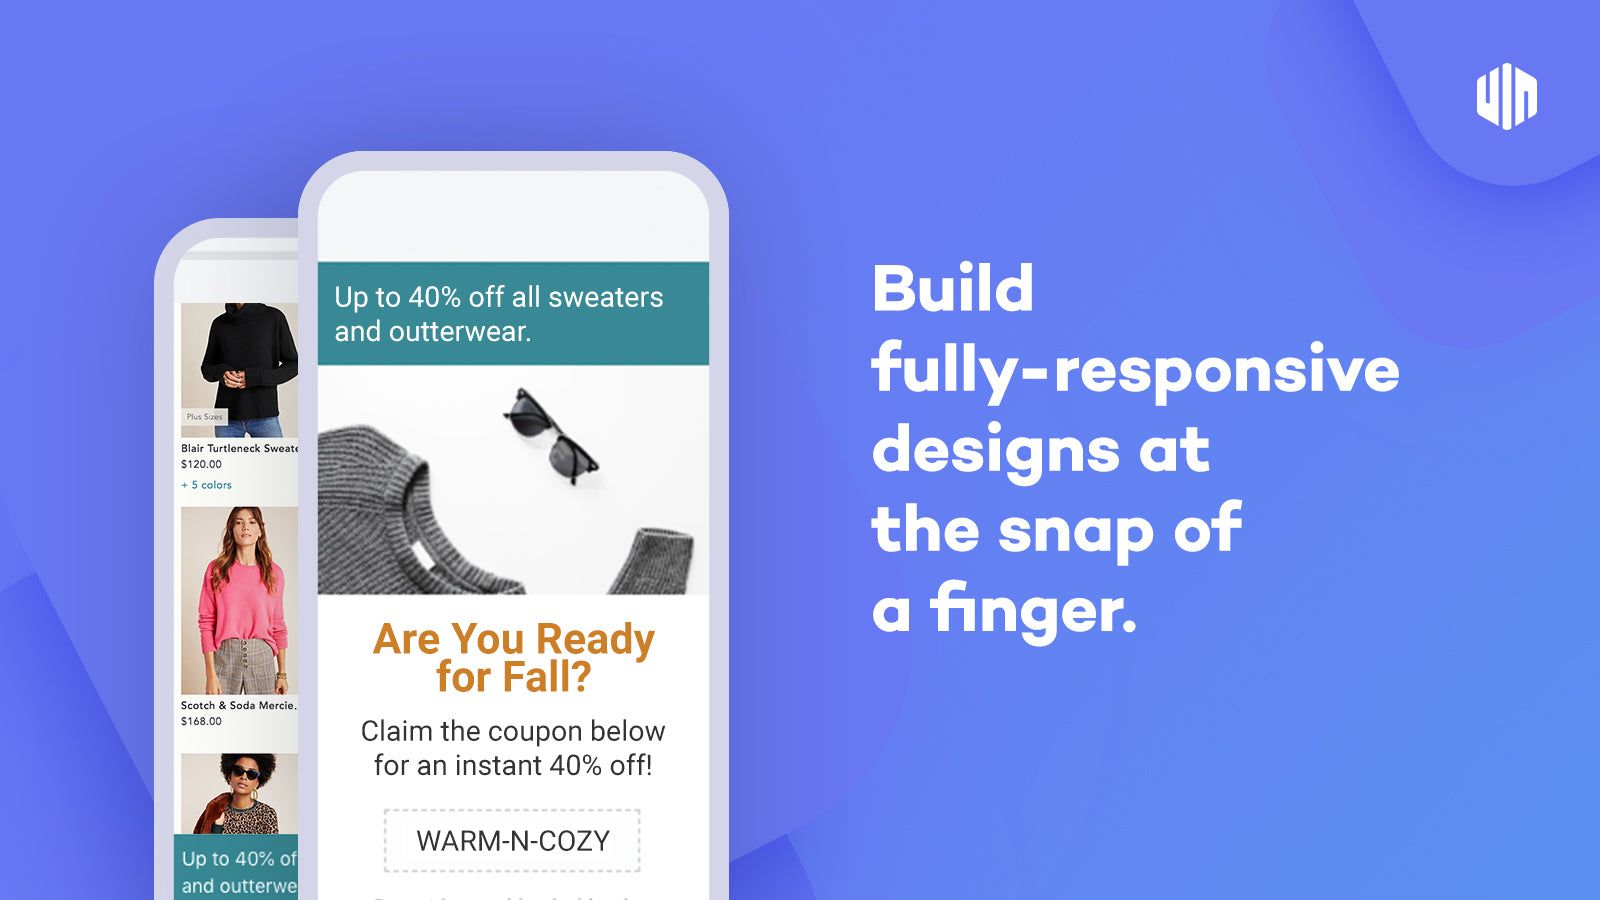 Build fully responsive designs at the snap of a finger